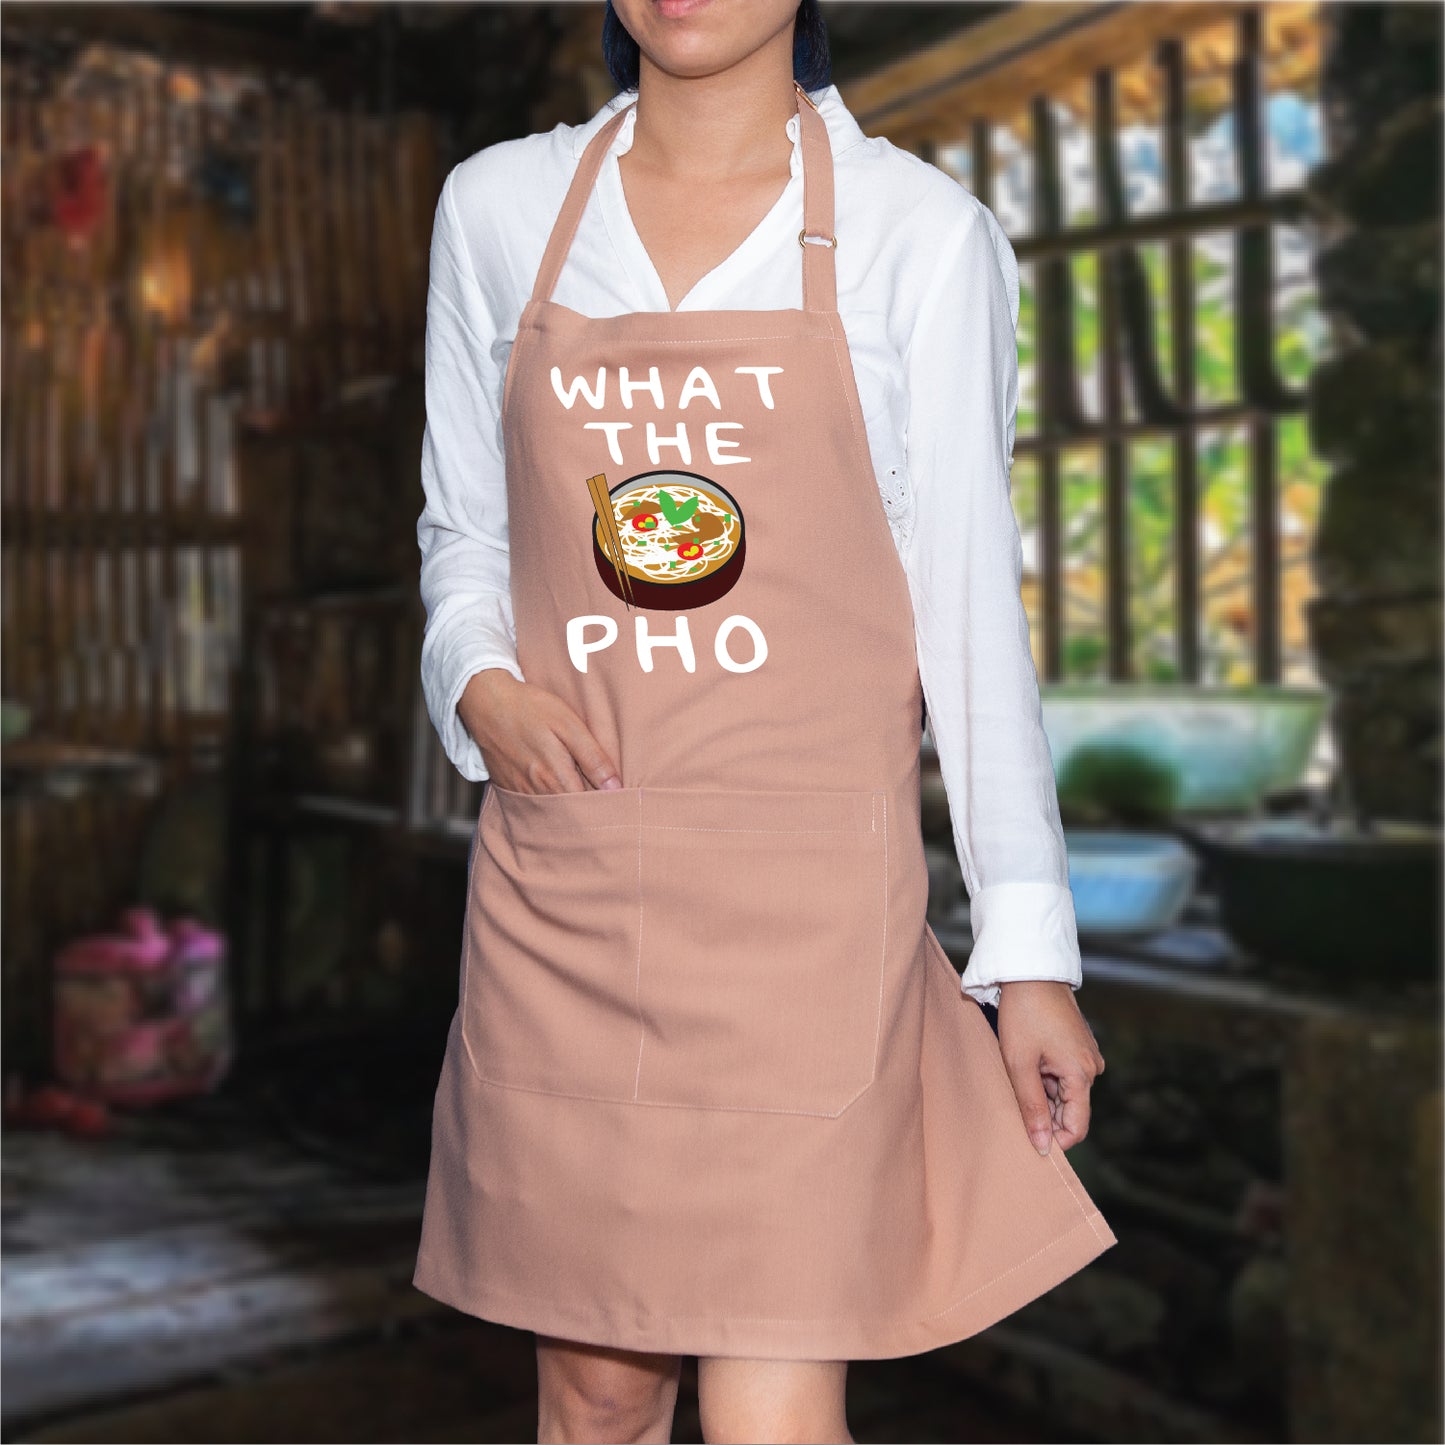 "What the Pho" Cooking Apron